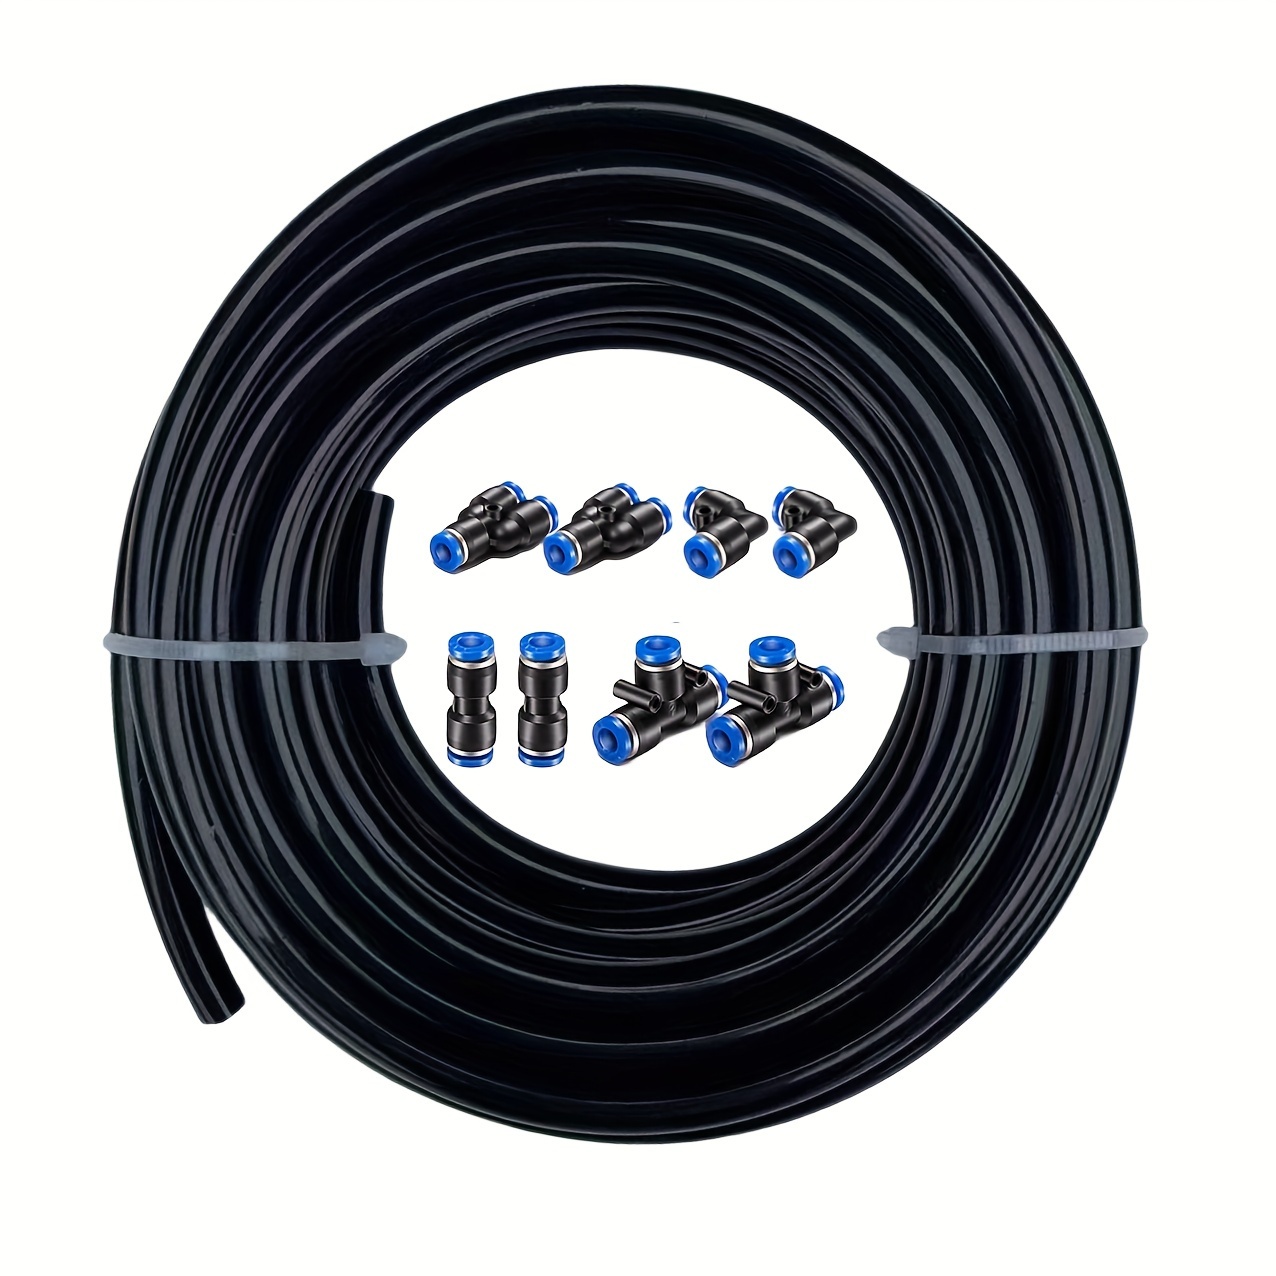 

High-flex Black Polyurethane Air Hose Kit - 32.8ft, Multiple Sizes (4mm/6mm/8mm/10mm), Ideal For Pneumatic Tools & Industrial Use